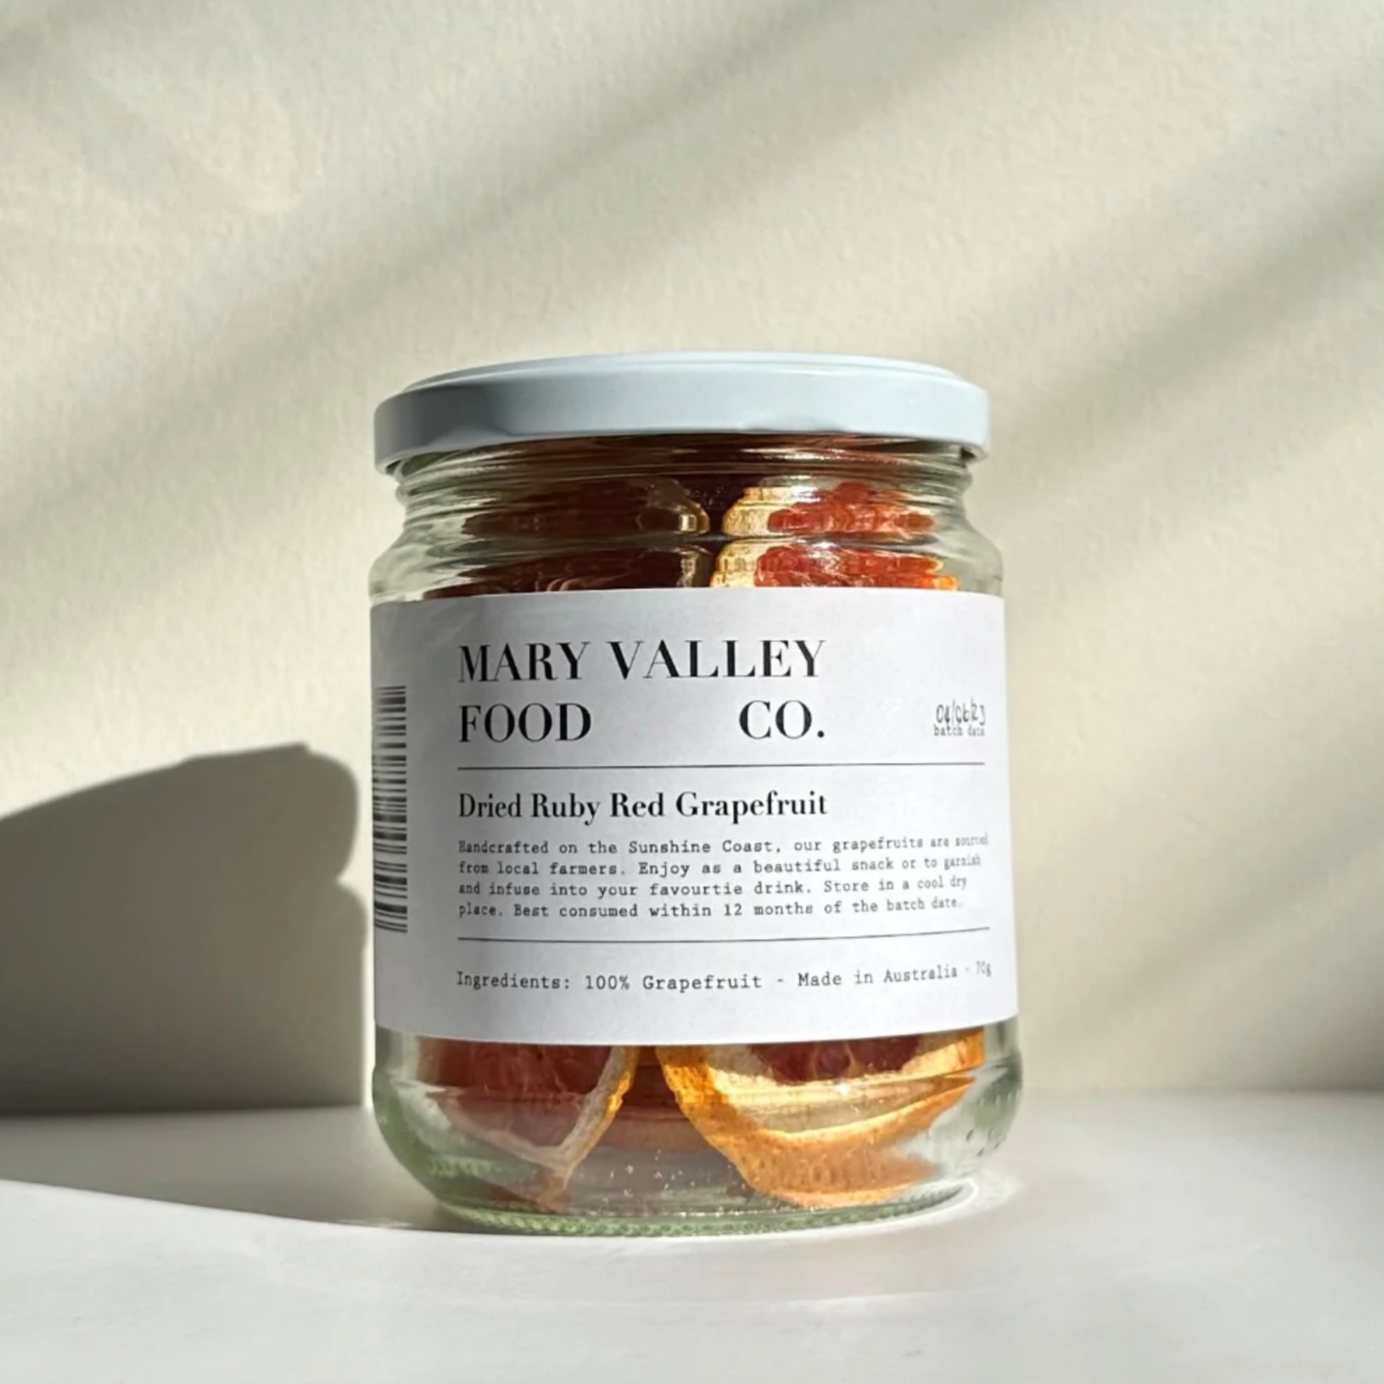 MARY VALLEY FOOD CO DRIED RUBY RED GRAPEFRUIT